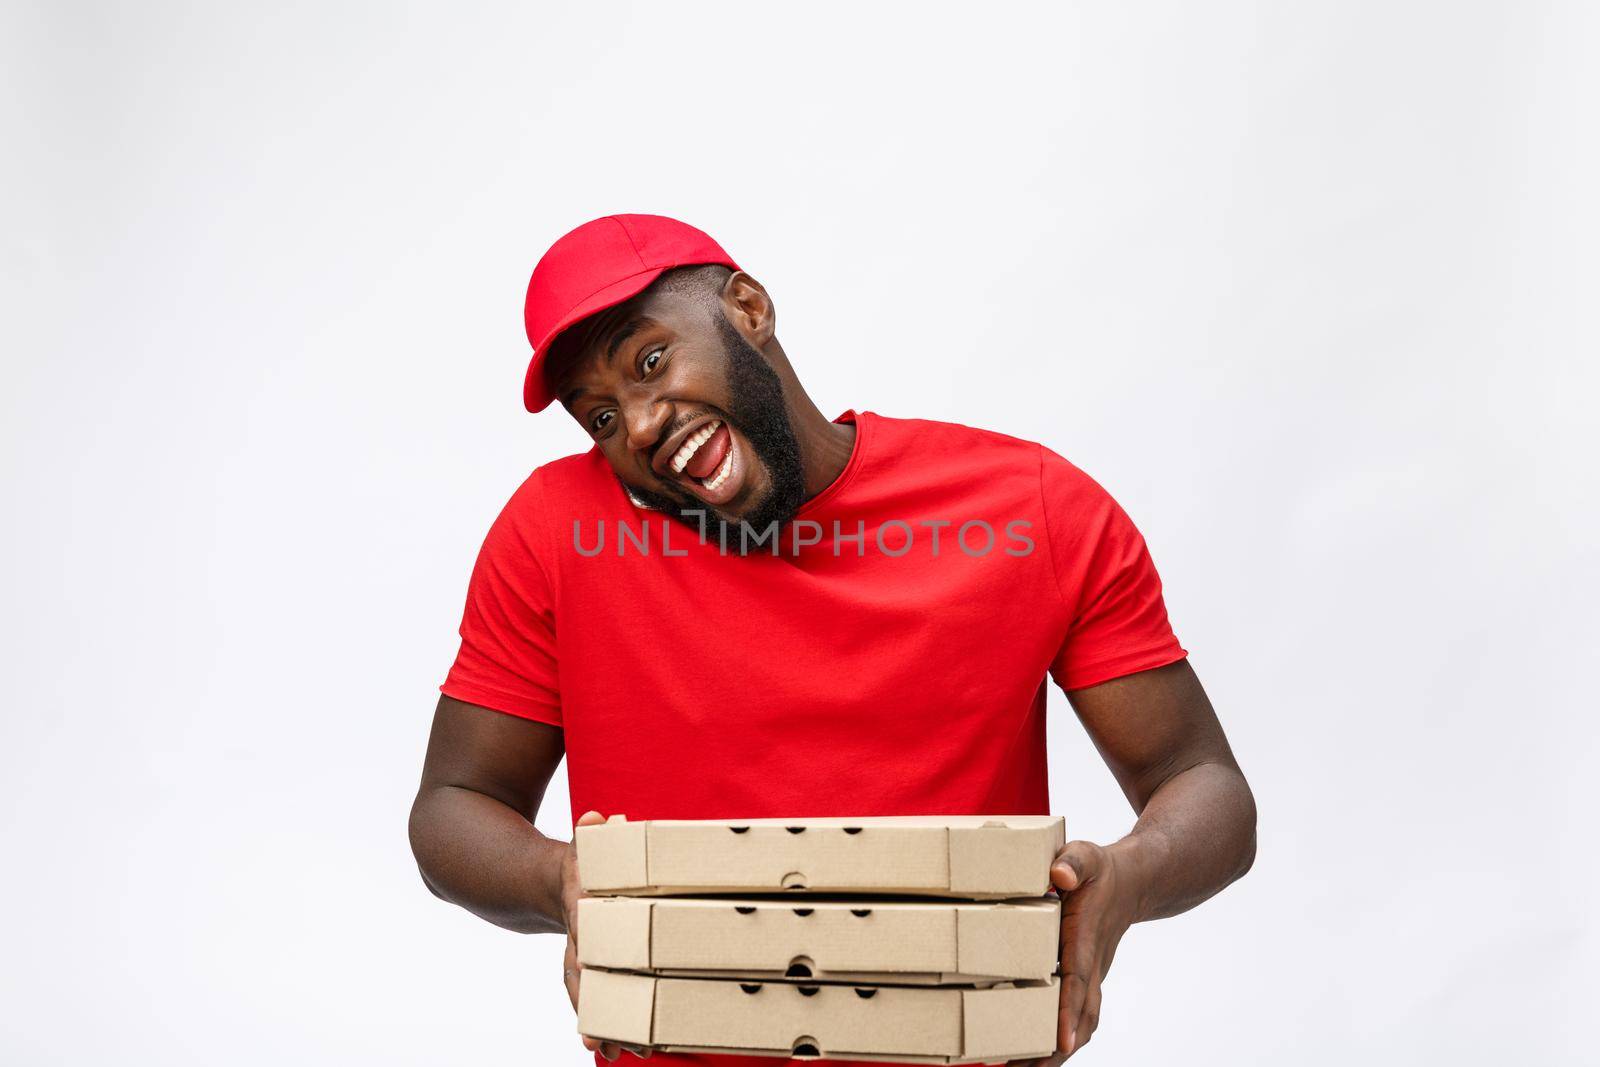 Delivery Concept: Handsome african pizza delivery man talking to mobile with shocking facial expression. Isolated over grey background